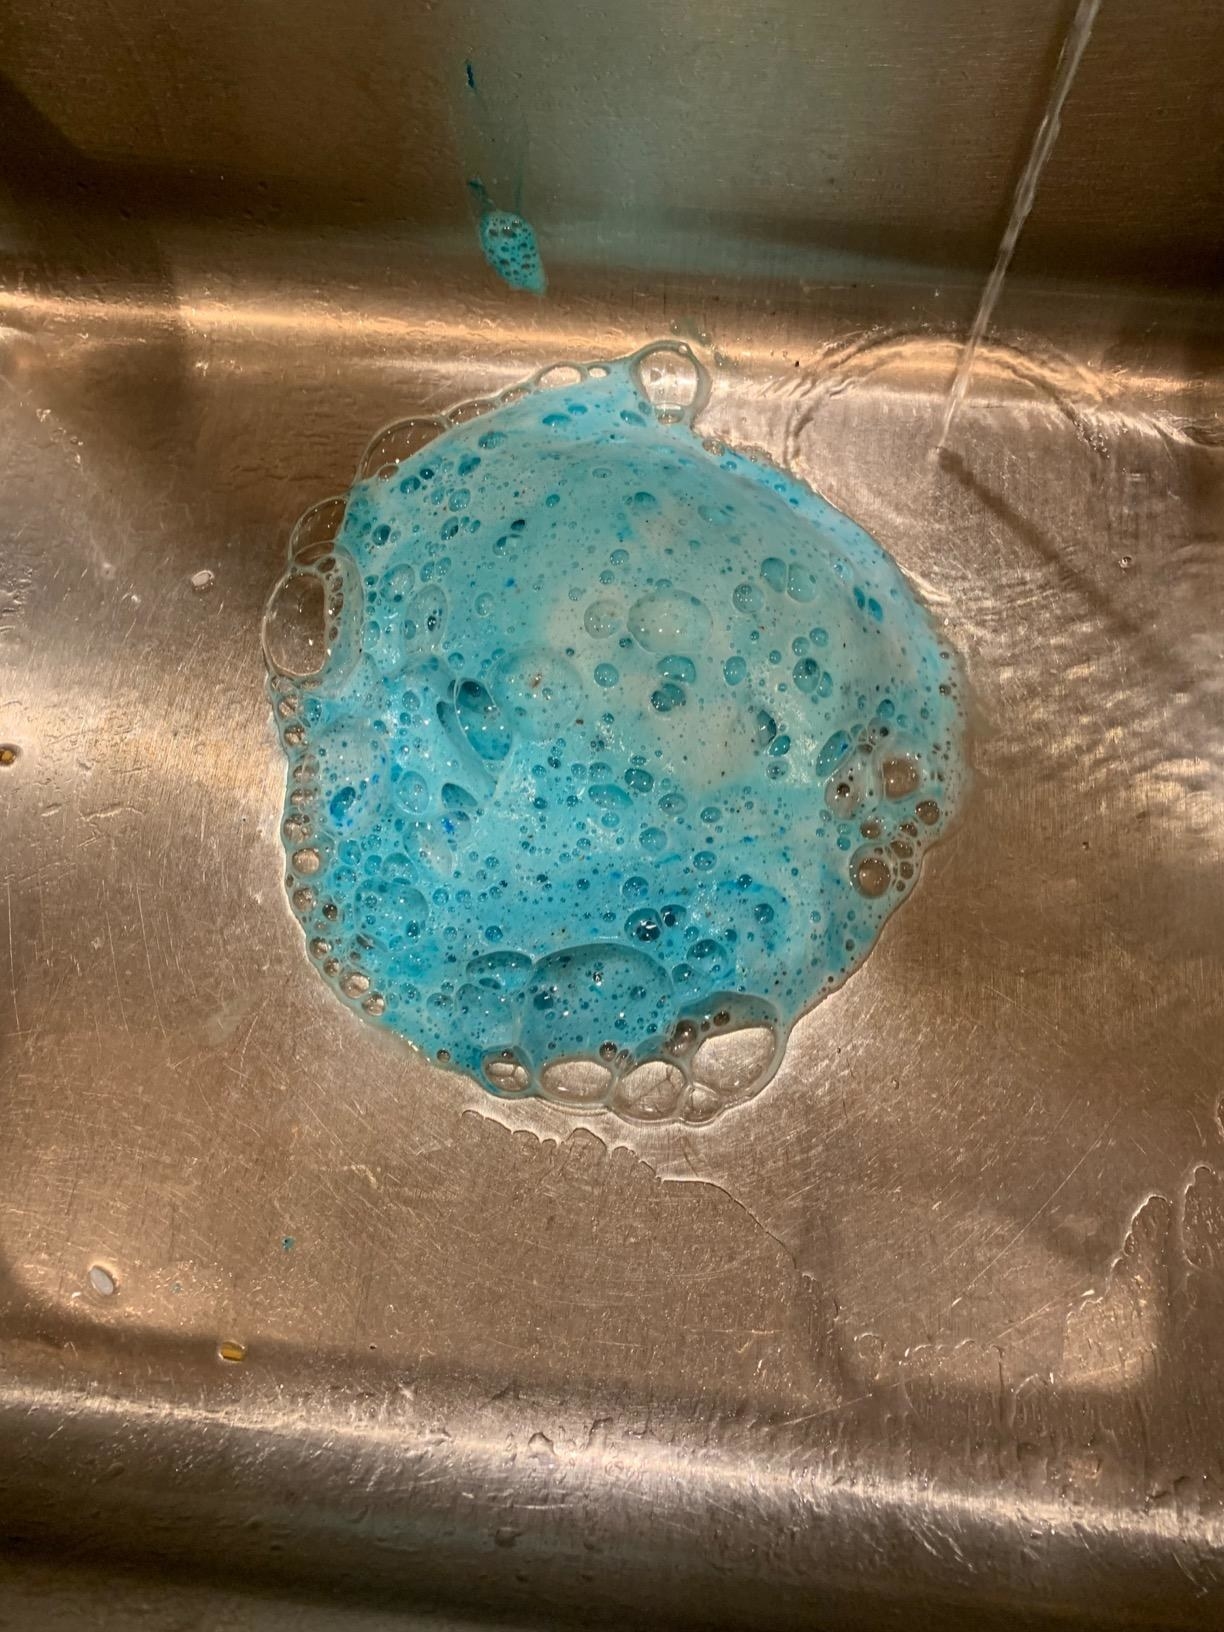 A review image of a disposal filled with blue foam